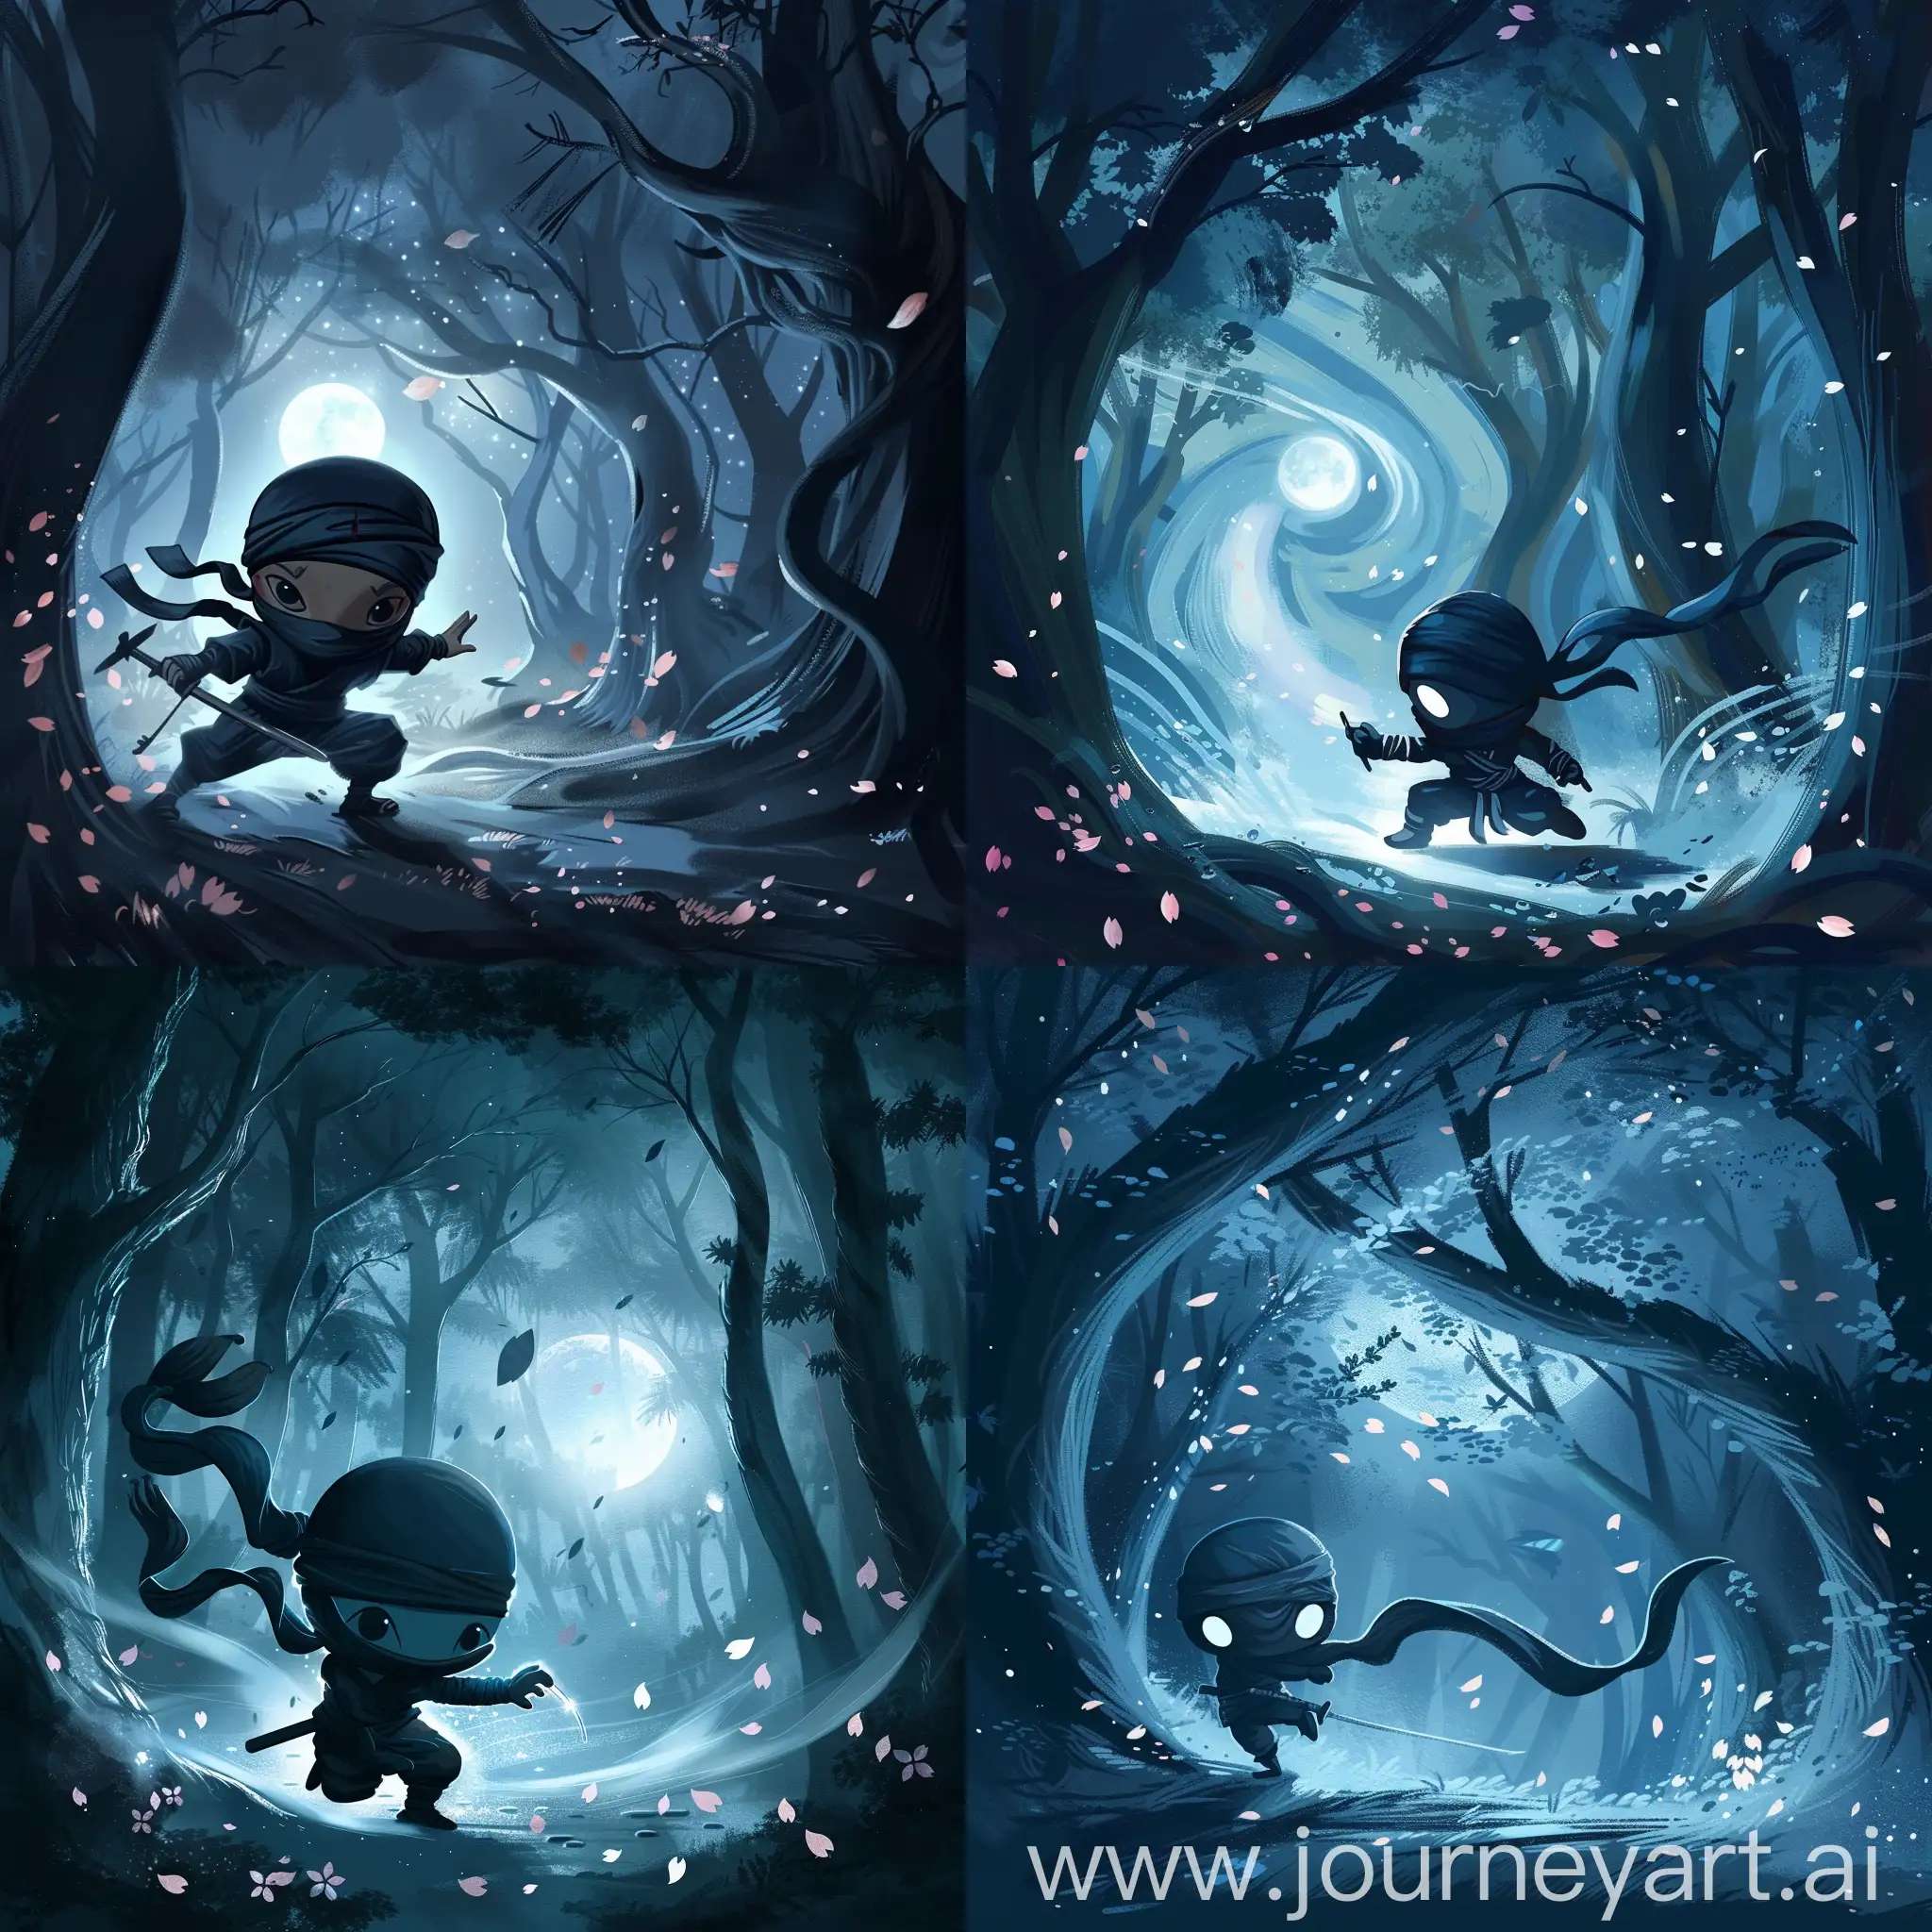 Mystical-Moonlit-Forest-Ninja-Chibi-Shadowy-Resilience-and-Courage